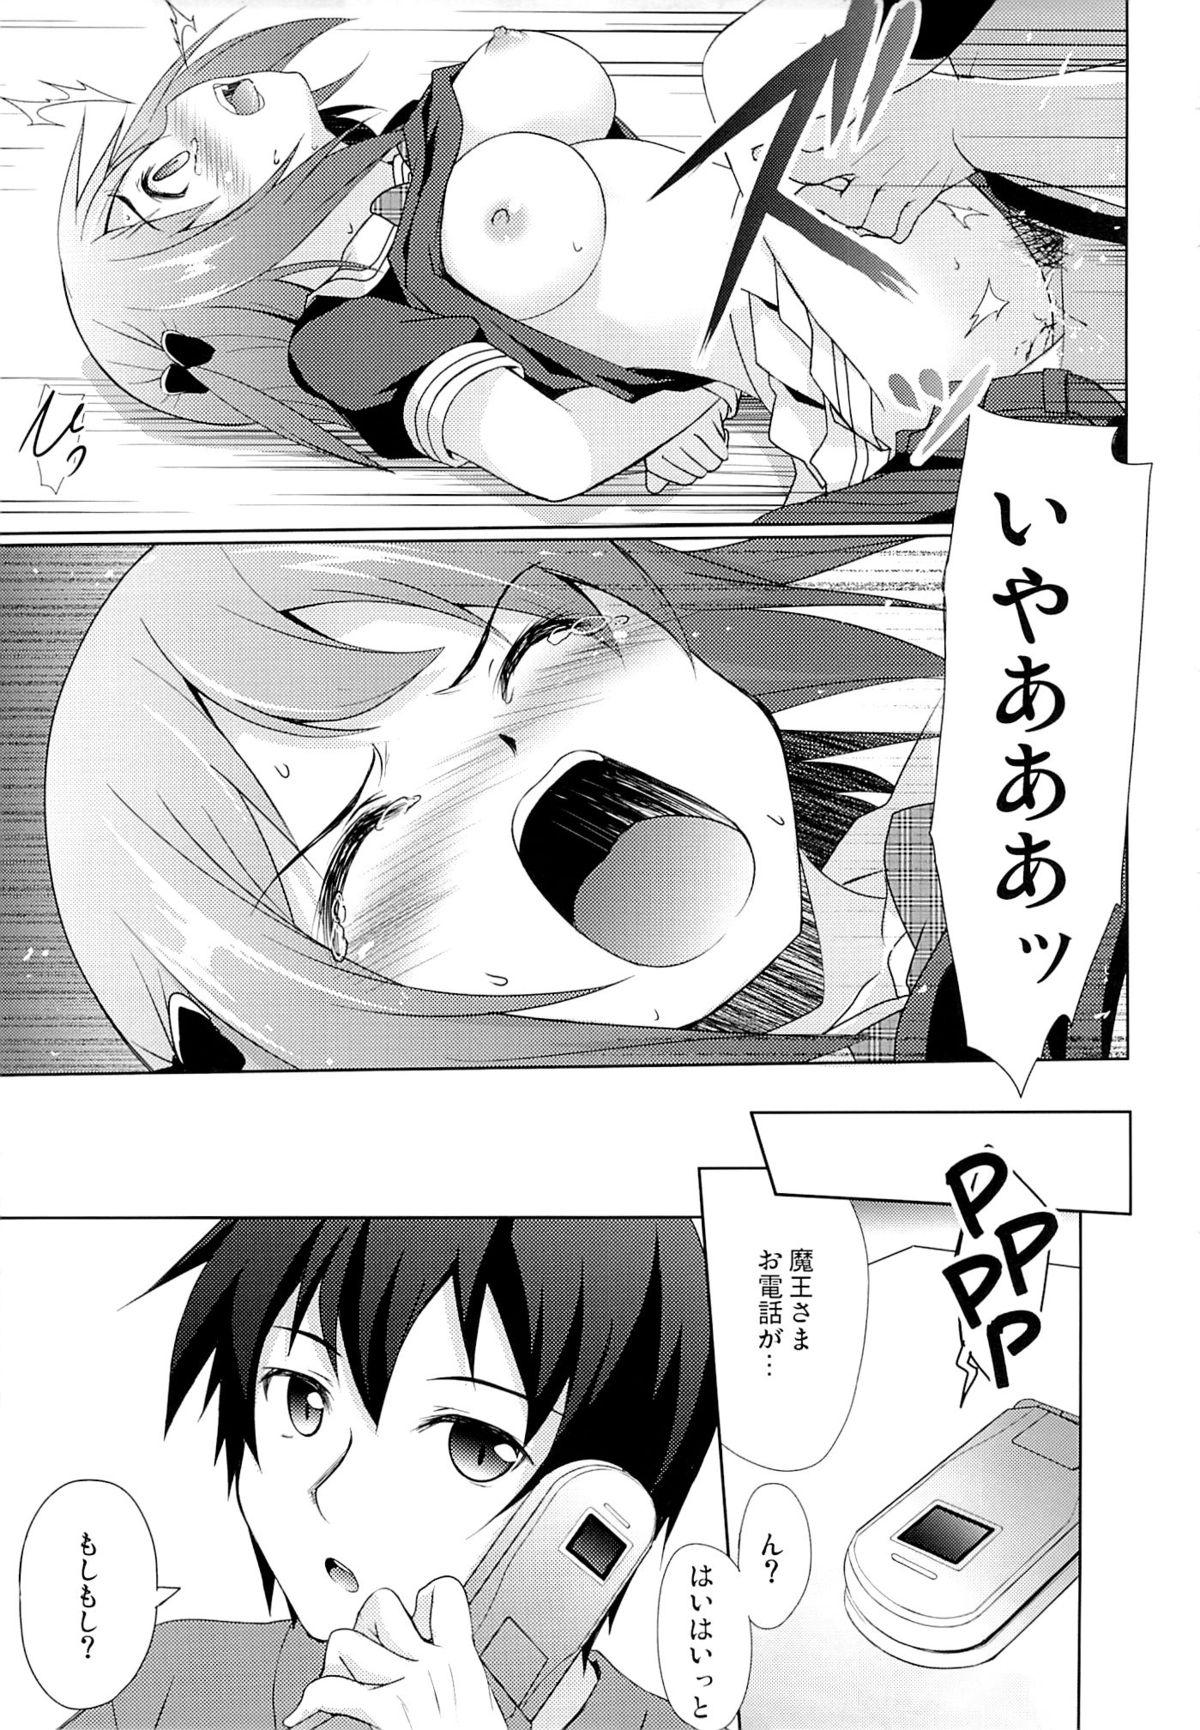 Chii-chan to Bad End. 8